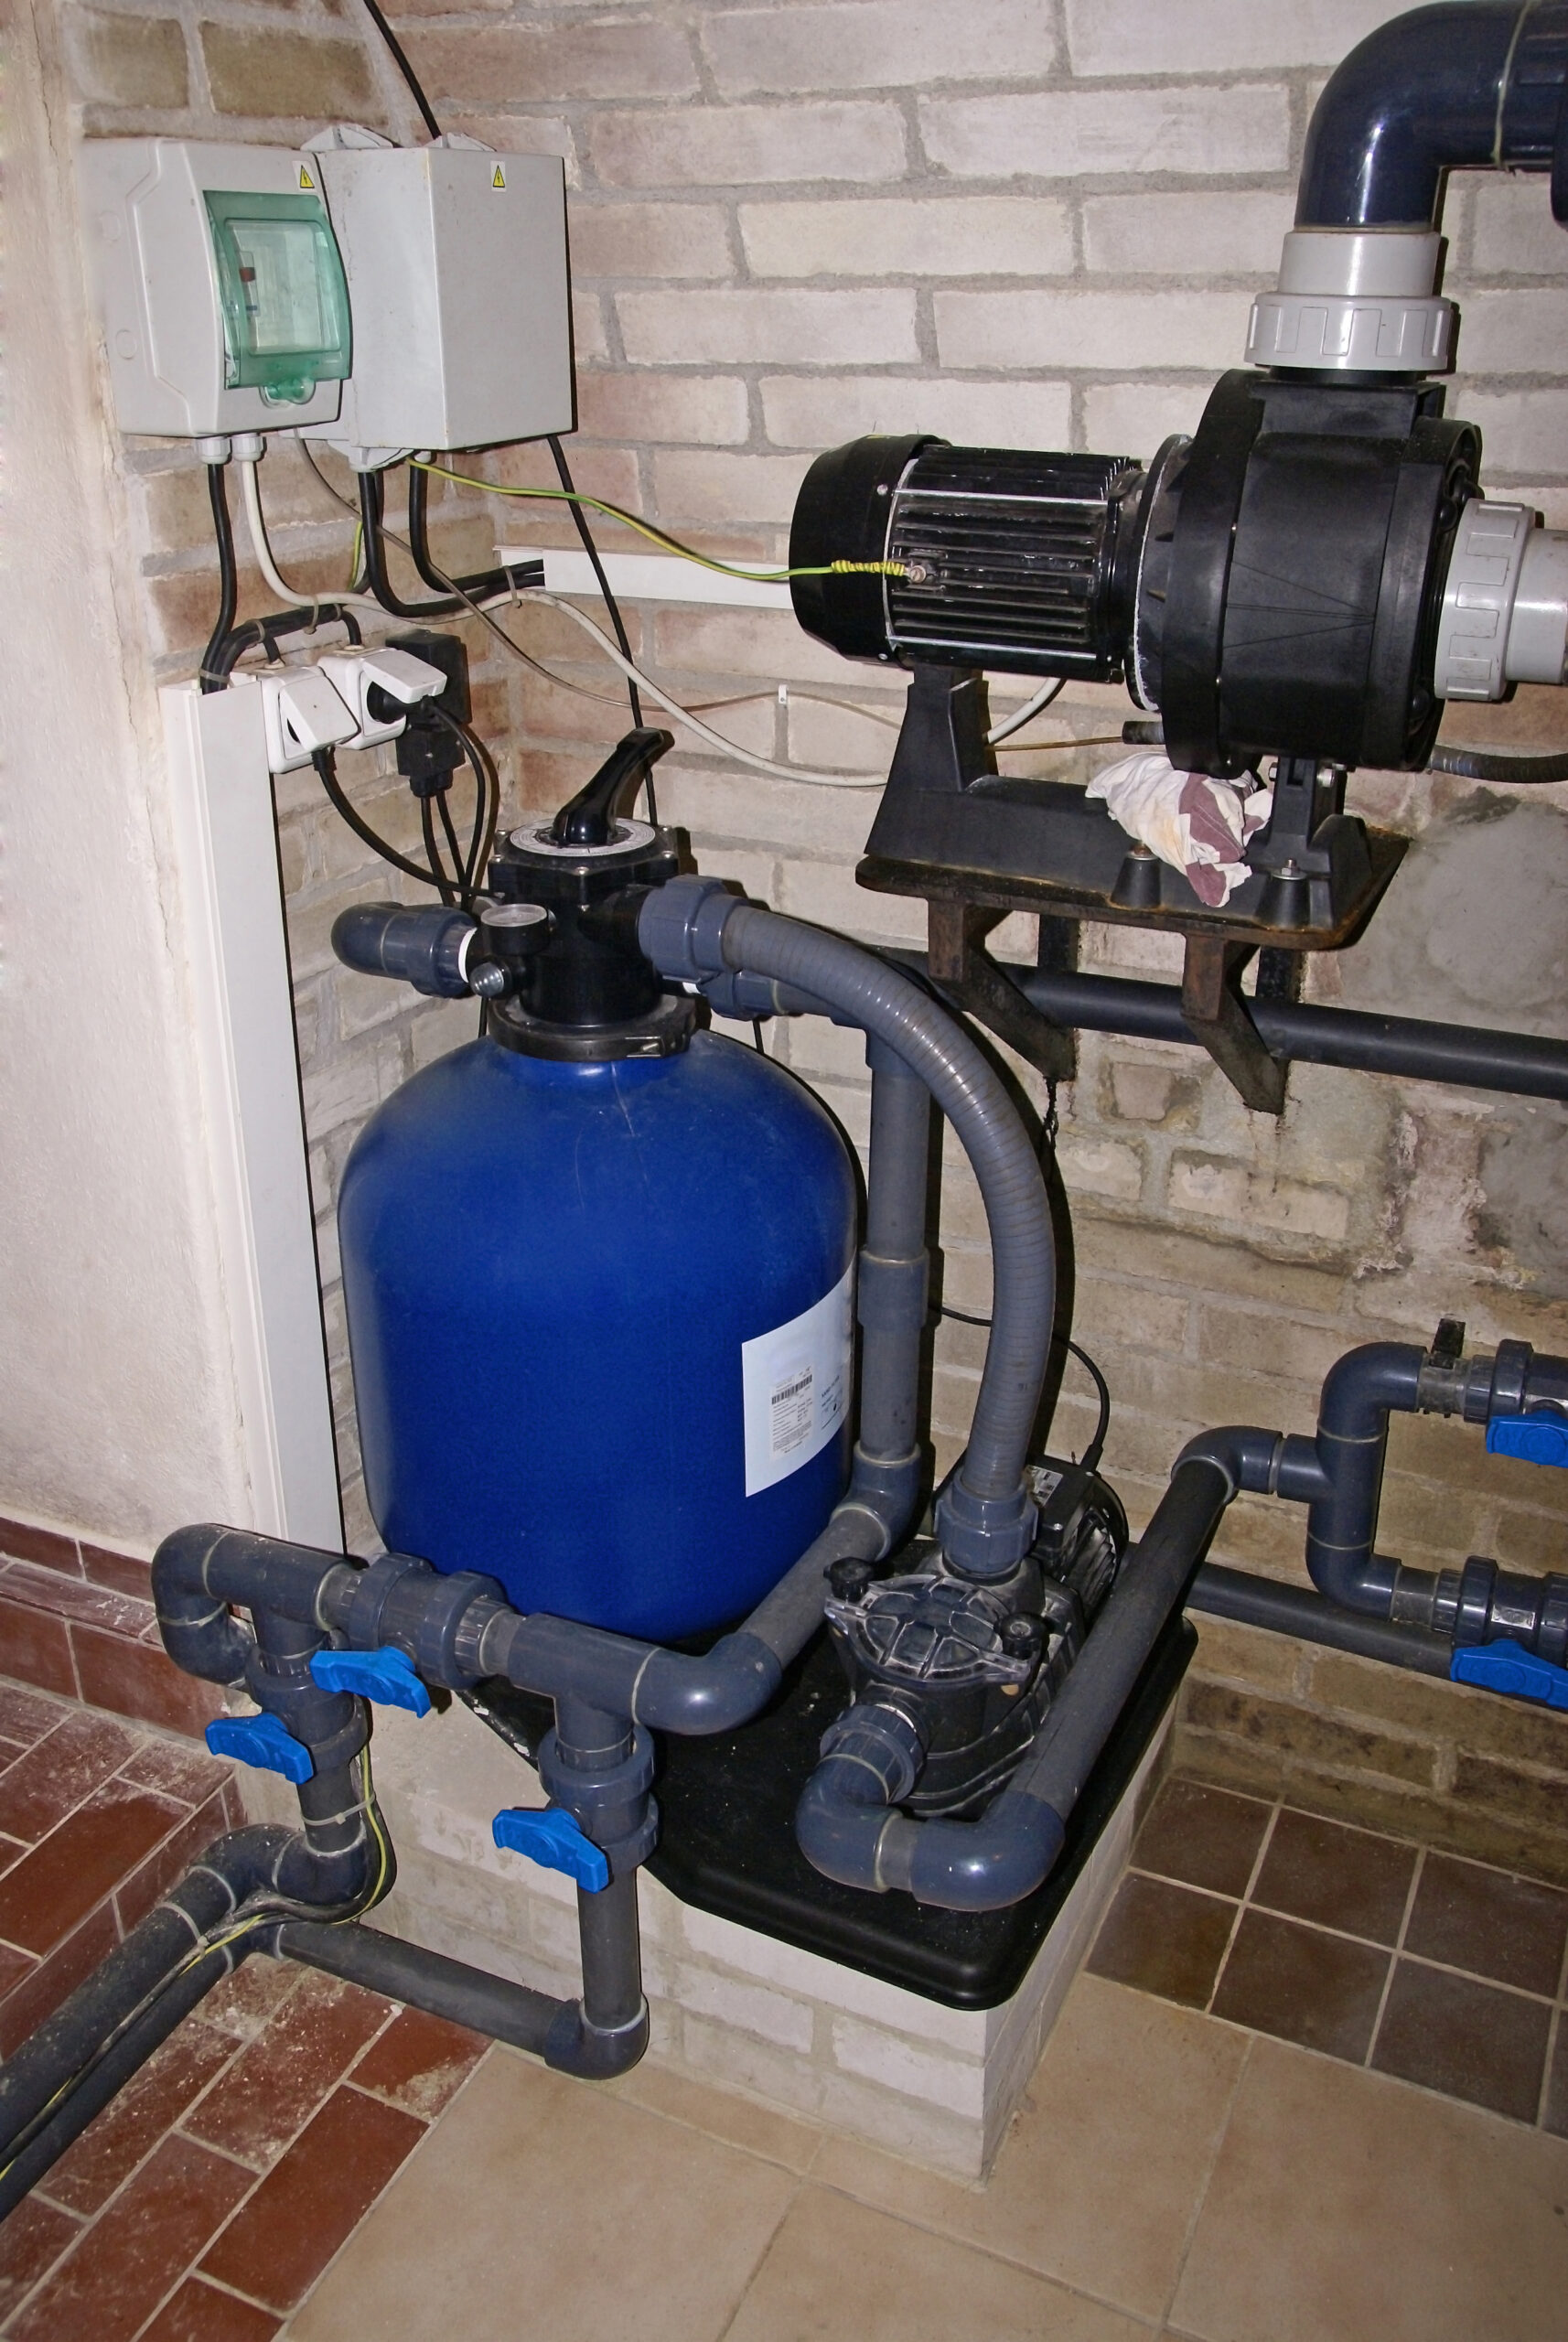 Pool machine equipment, including pumps, filters, and other machinery used for pool maintenance and water circulation.